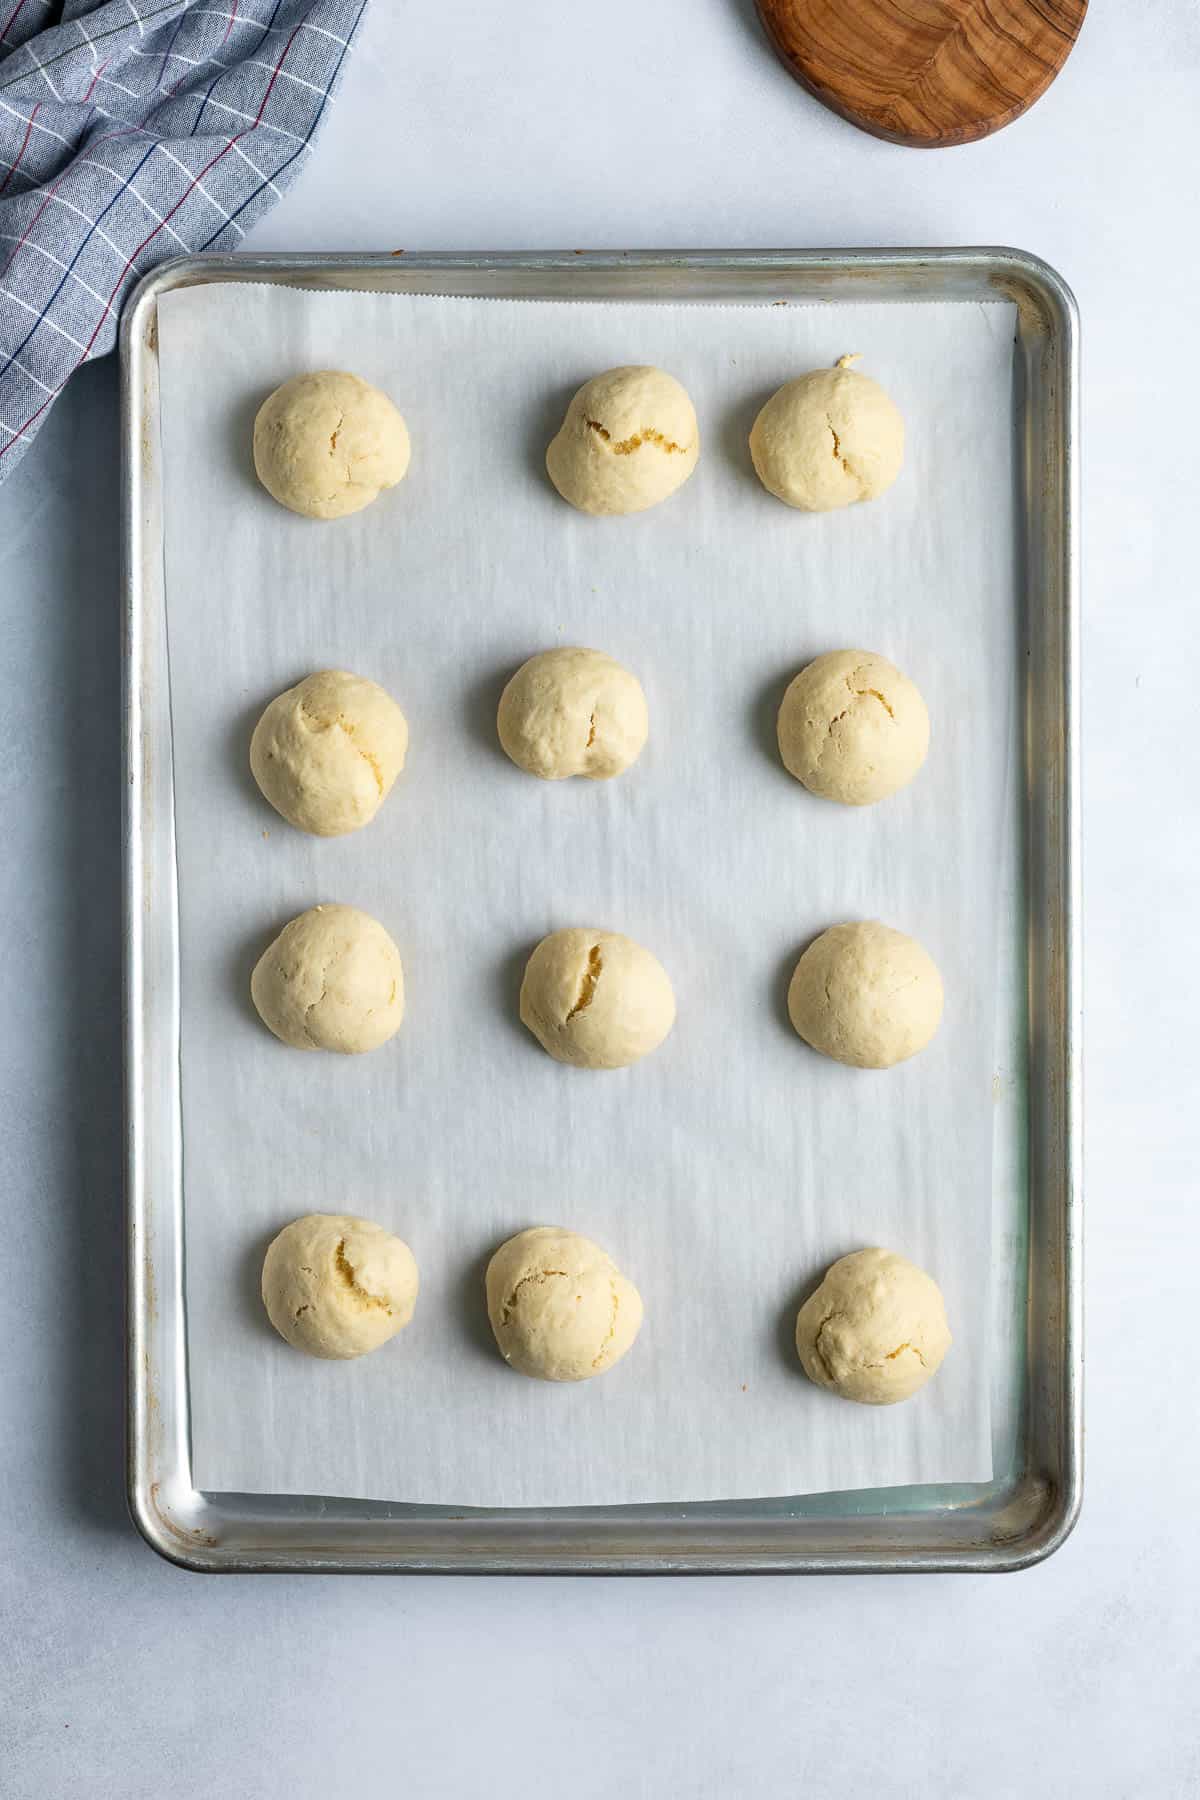 Baked anise cookies on the baking sheet.